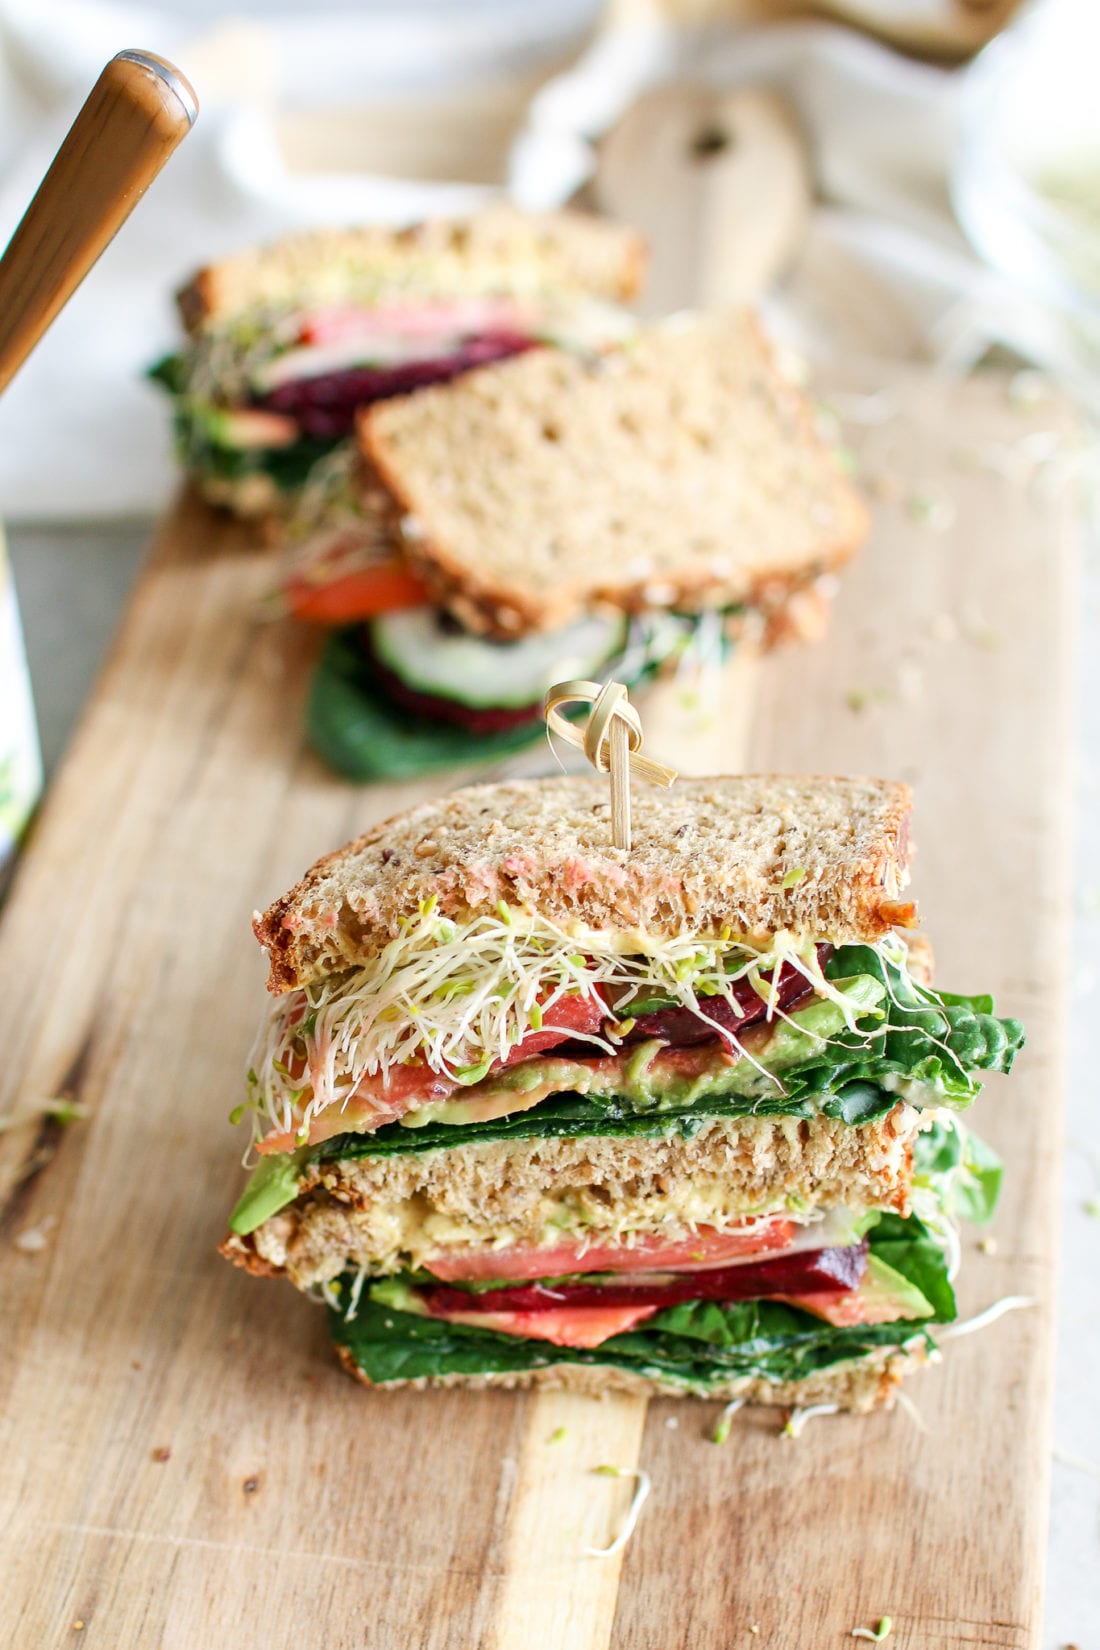 A colourful veggie sandwich stacked with fresh spinach, creamy avocado, crunchy cucumbers, tomatoes, beets and microgreens, smooshed between your favourite bread and smothered in caramelized onion hummus and creamy aioli. The ultimate sammy!